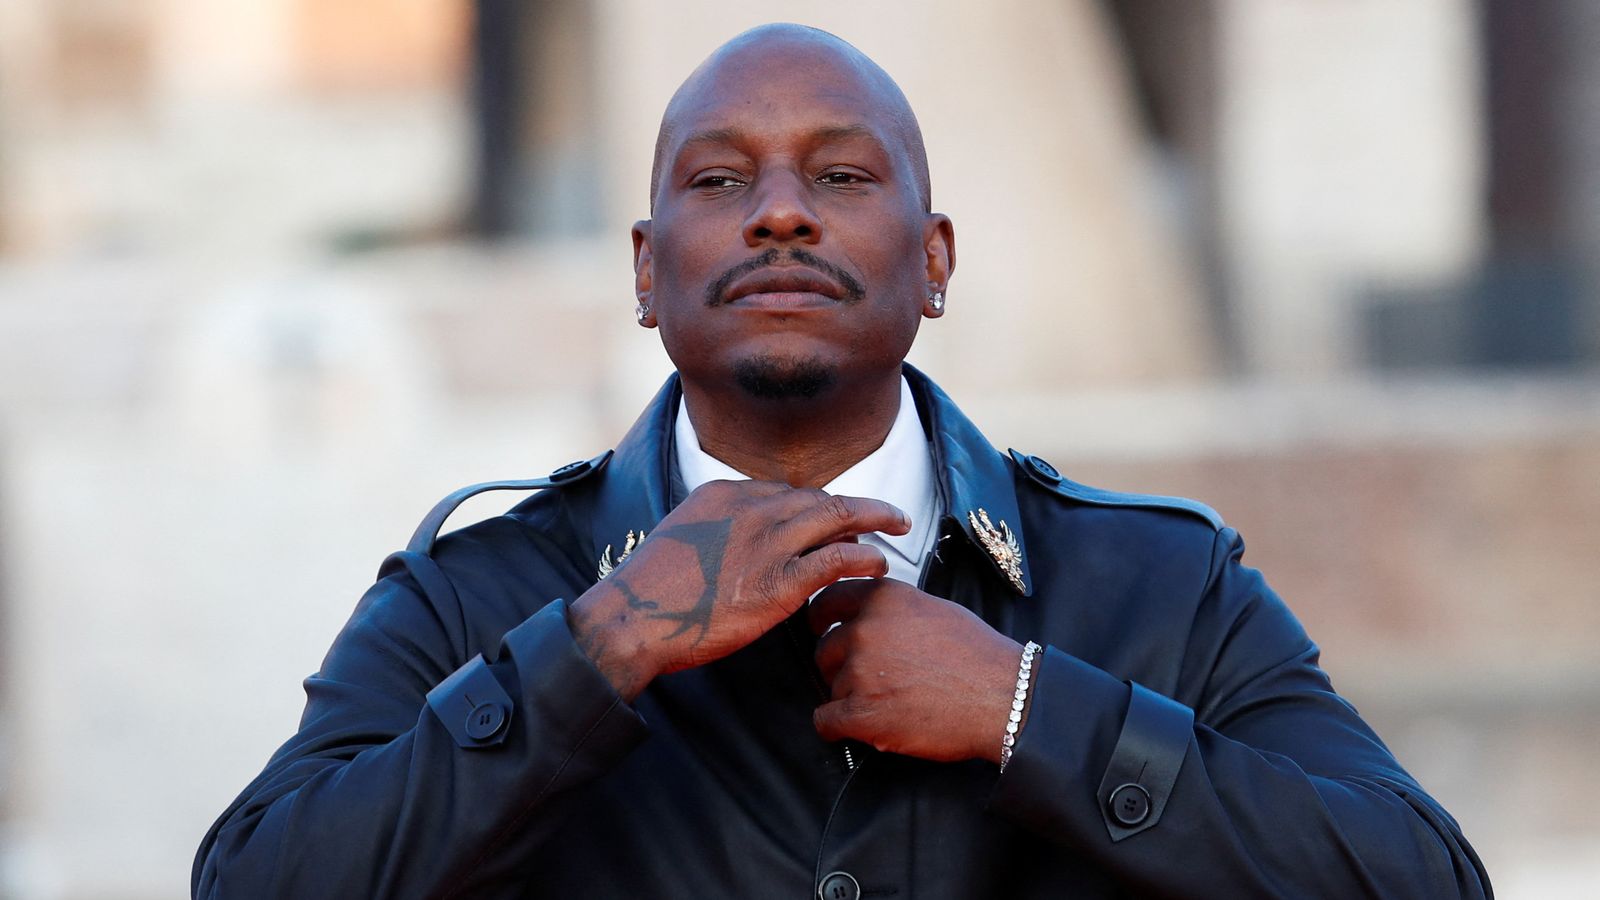 Home Depot Refutes Tyrese Gibson’s Claims Of Racism In Lawsuit